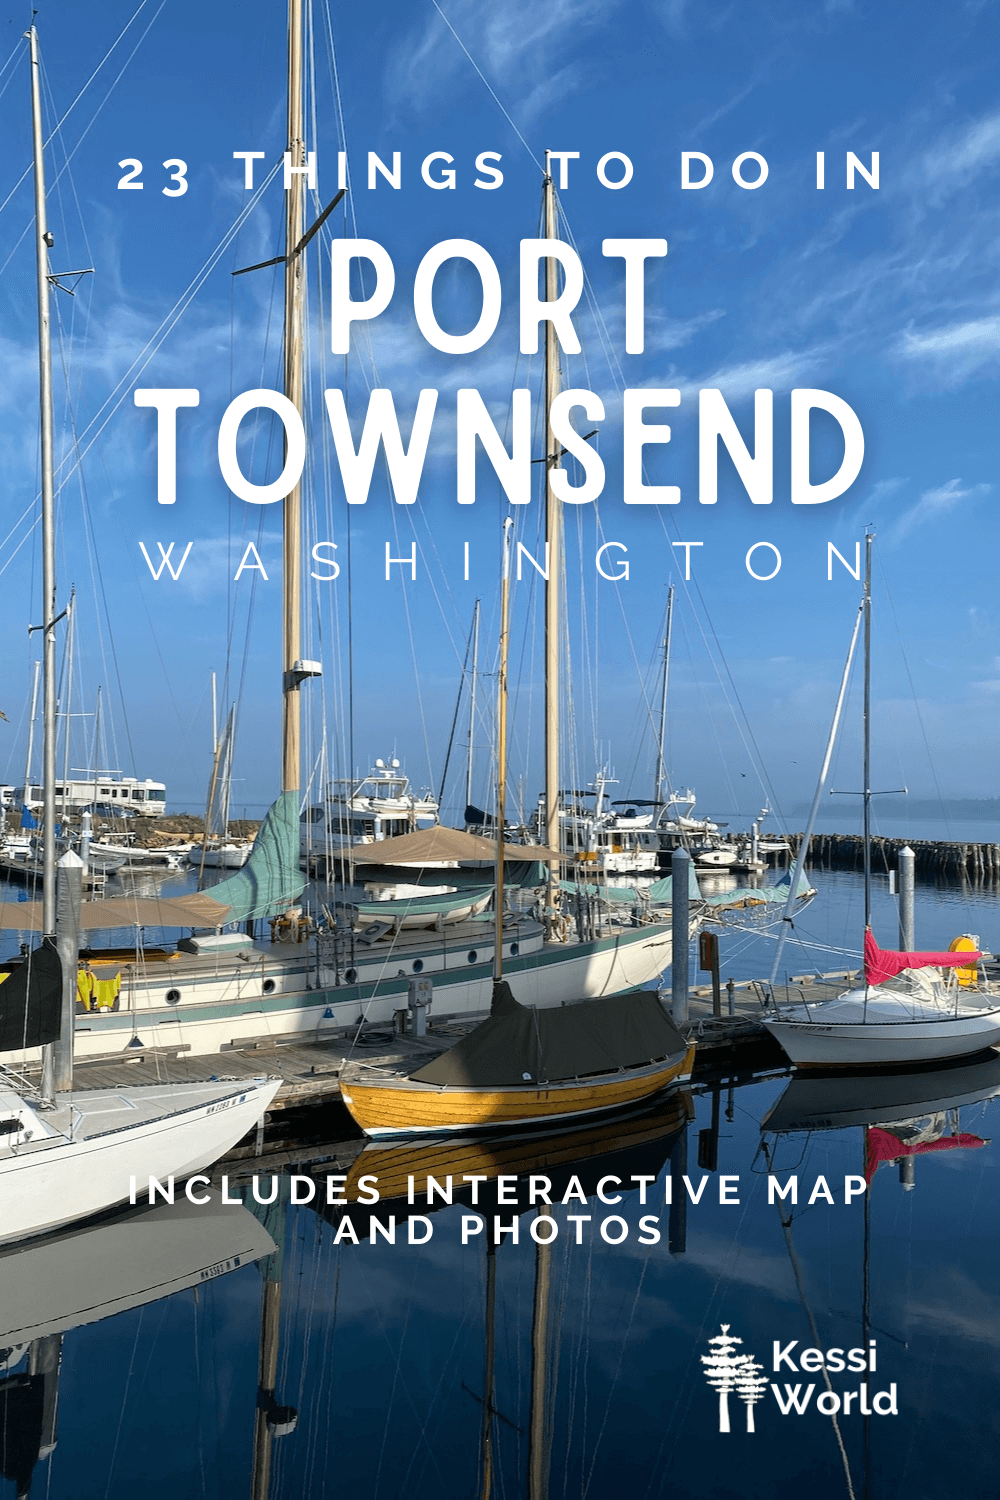 This Pinterest Pin has white lettering that says 23 things to do in Port Townsend, Washington and shows a brightly colored wooden boats in the marina.